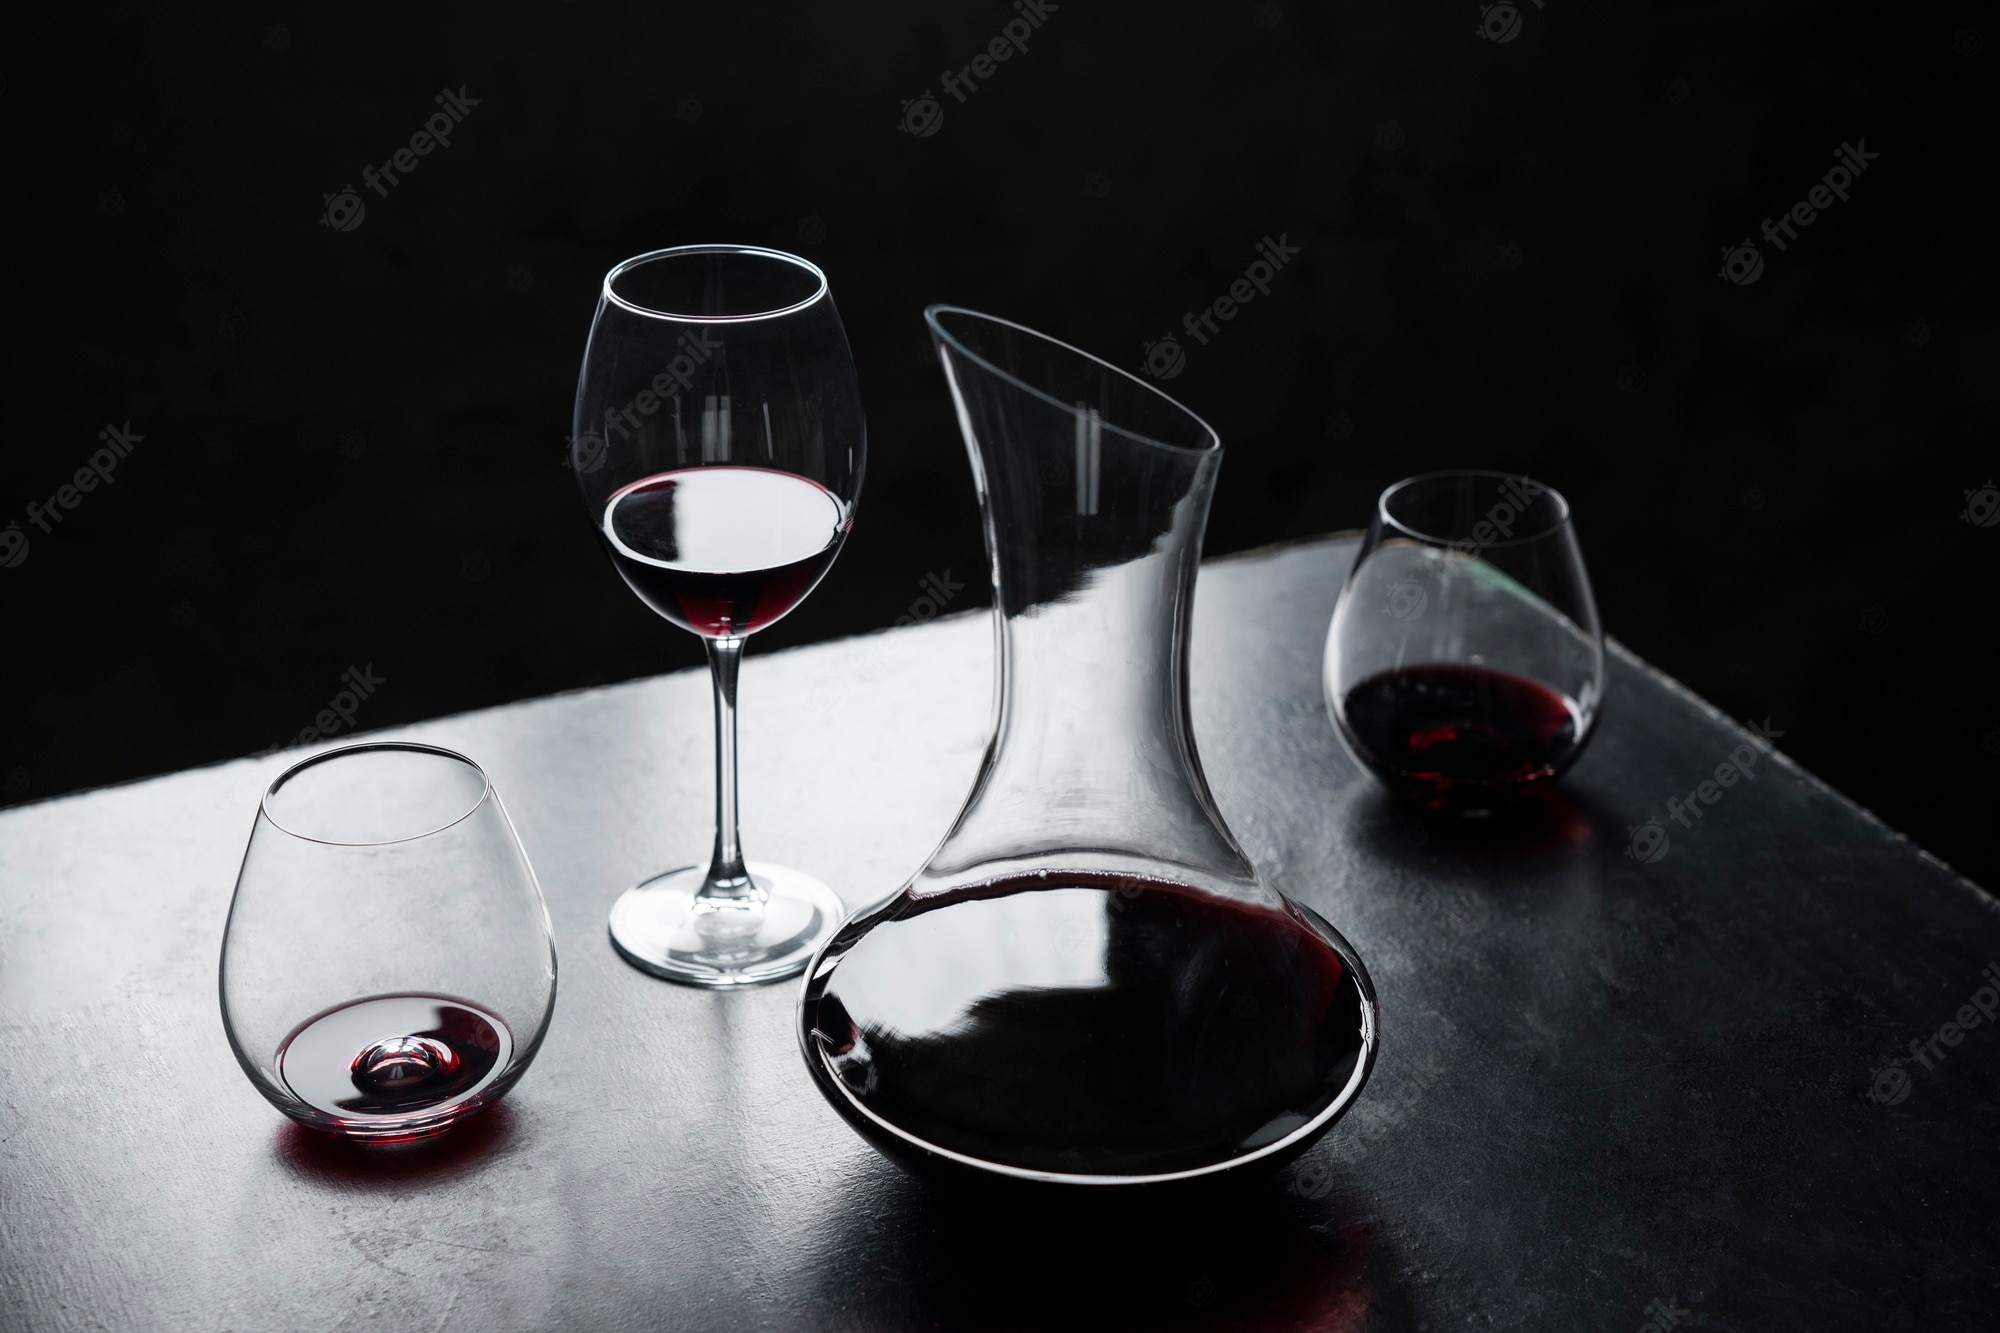 Red Wine Aesthetic Wallpapers